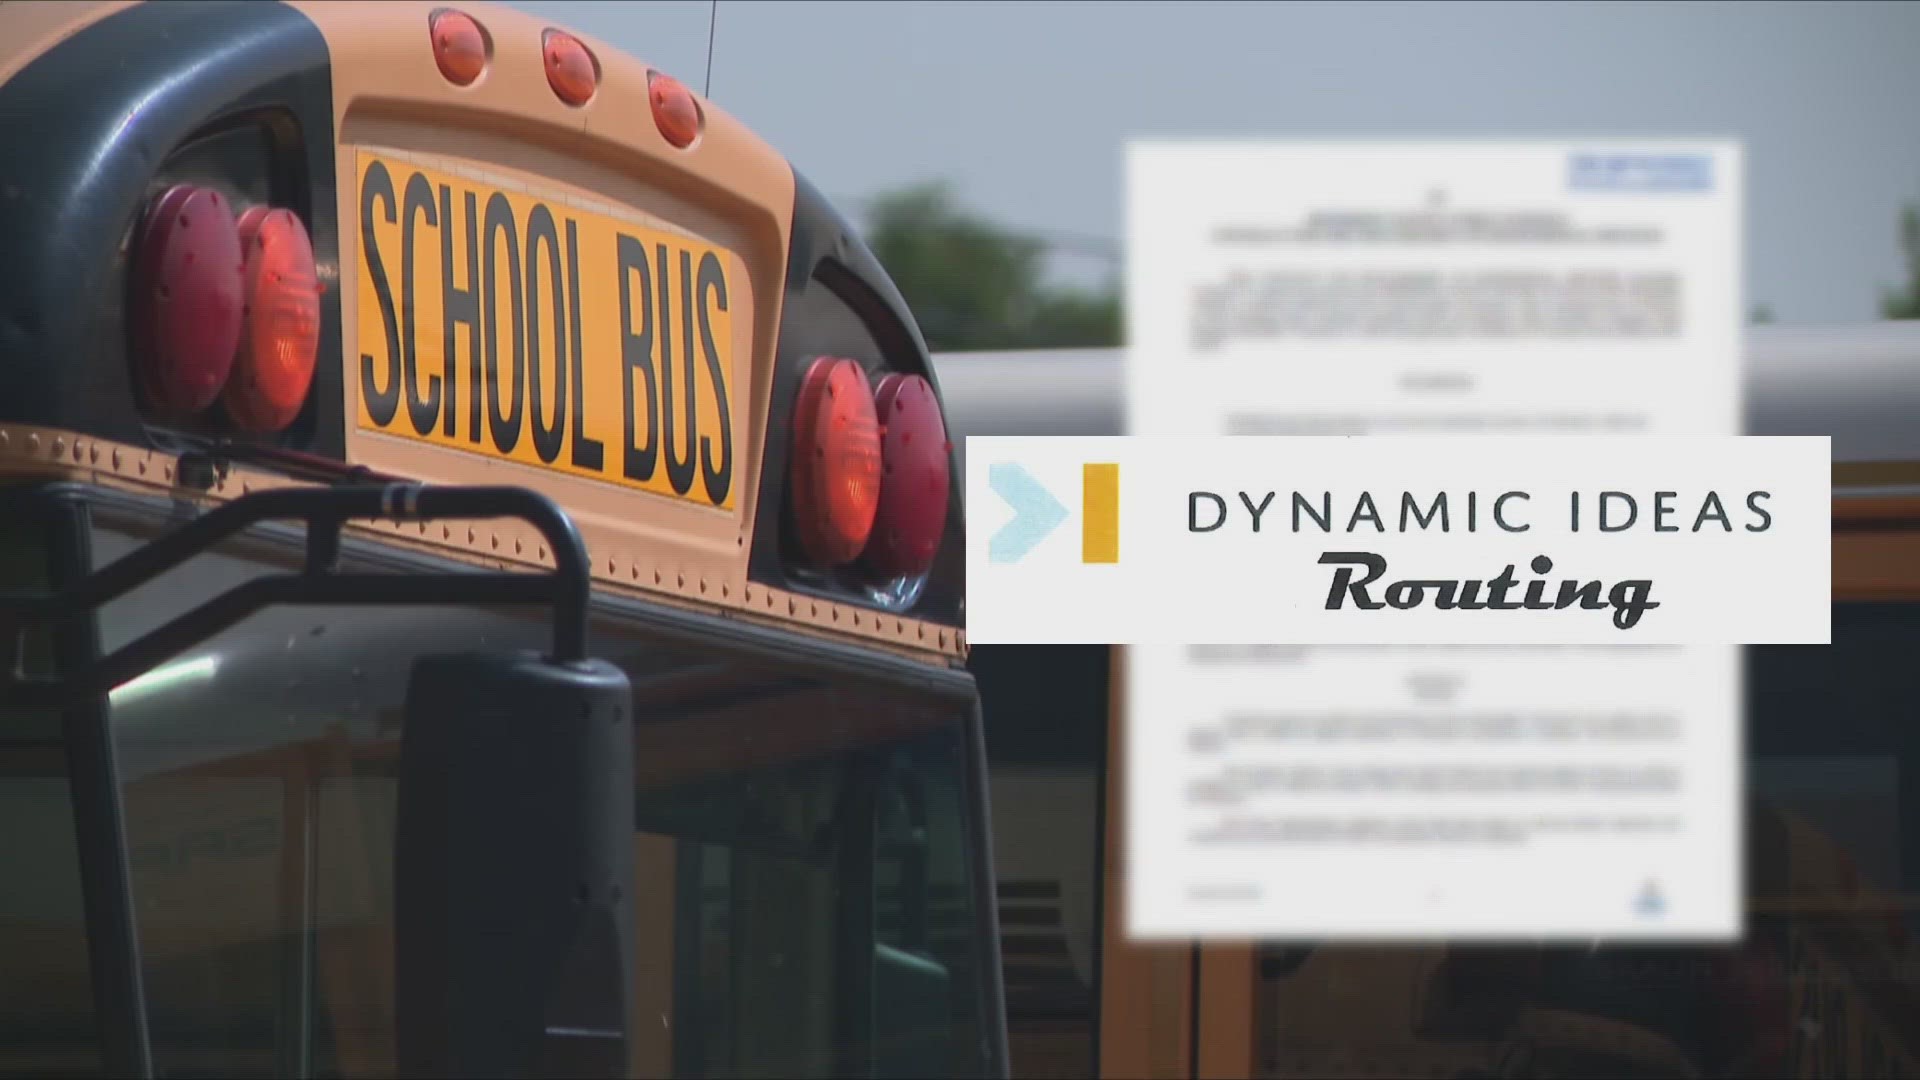 In June 2021, JCPS signed a contract with the company under its old name Dynamic Ideas for $509,000.